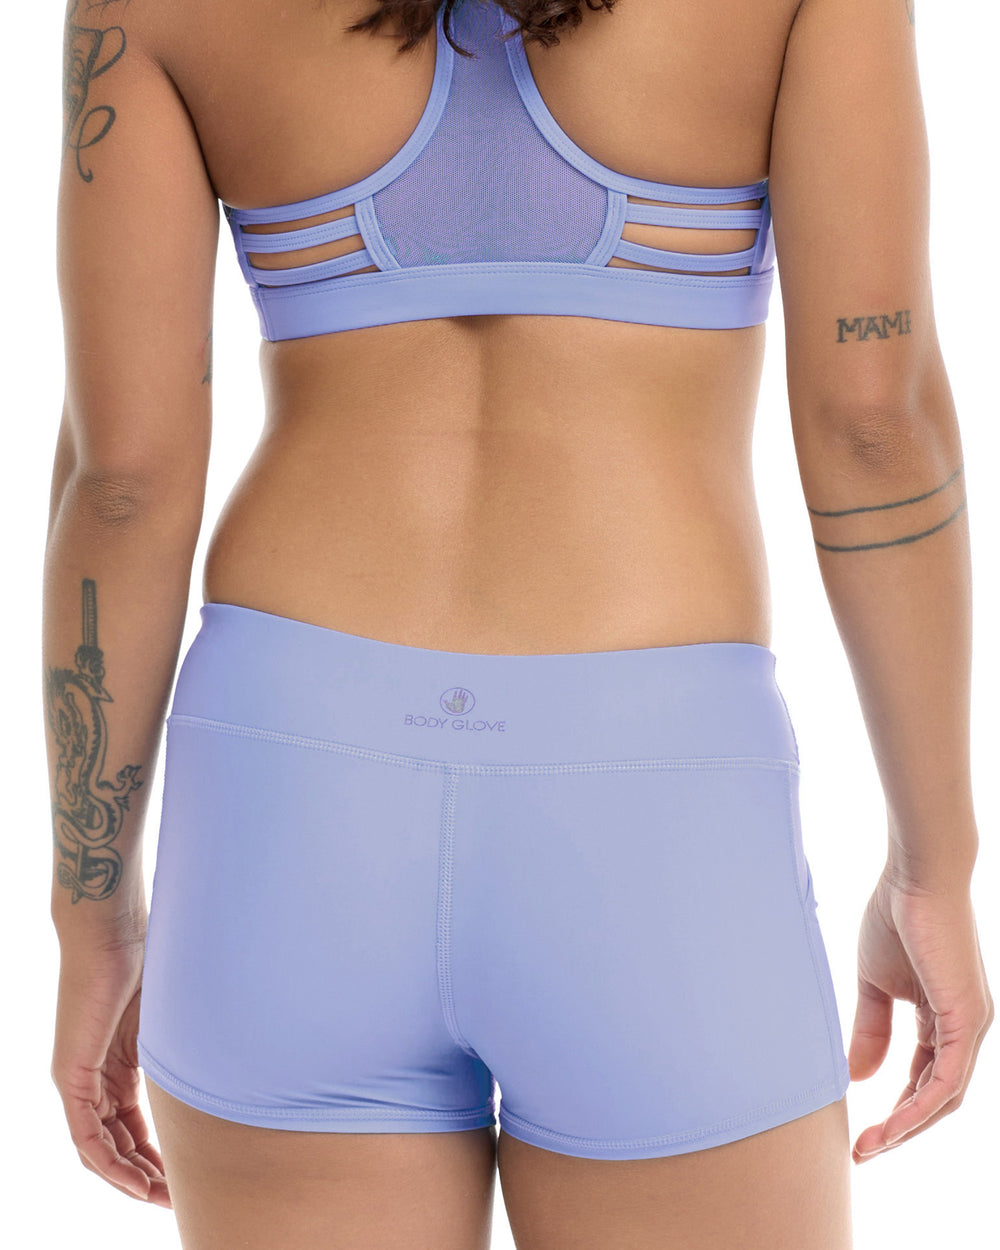 Smoothies Rider Short - Periwinkle